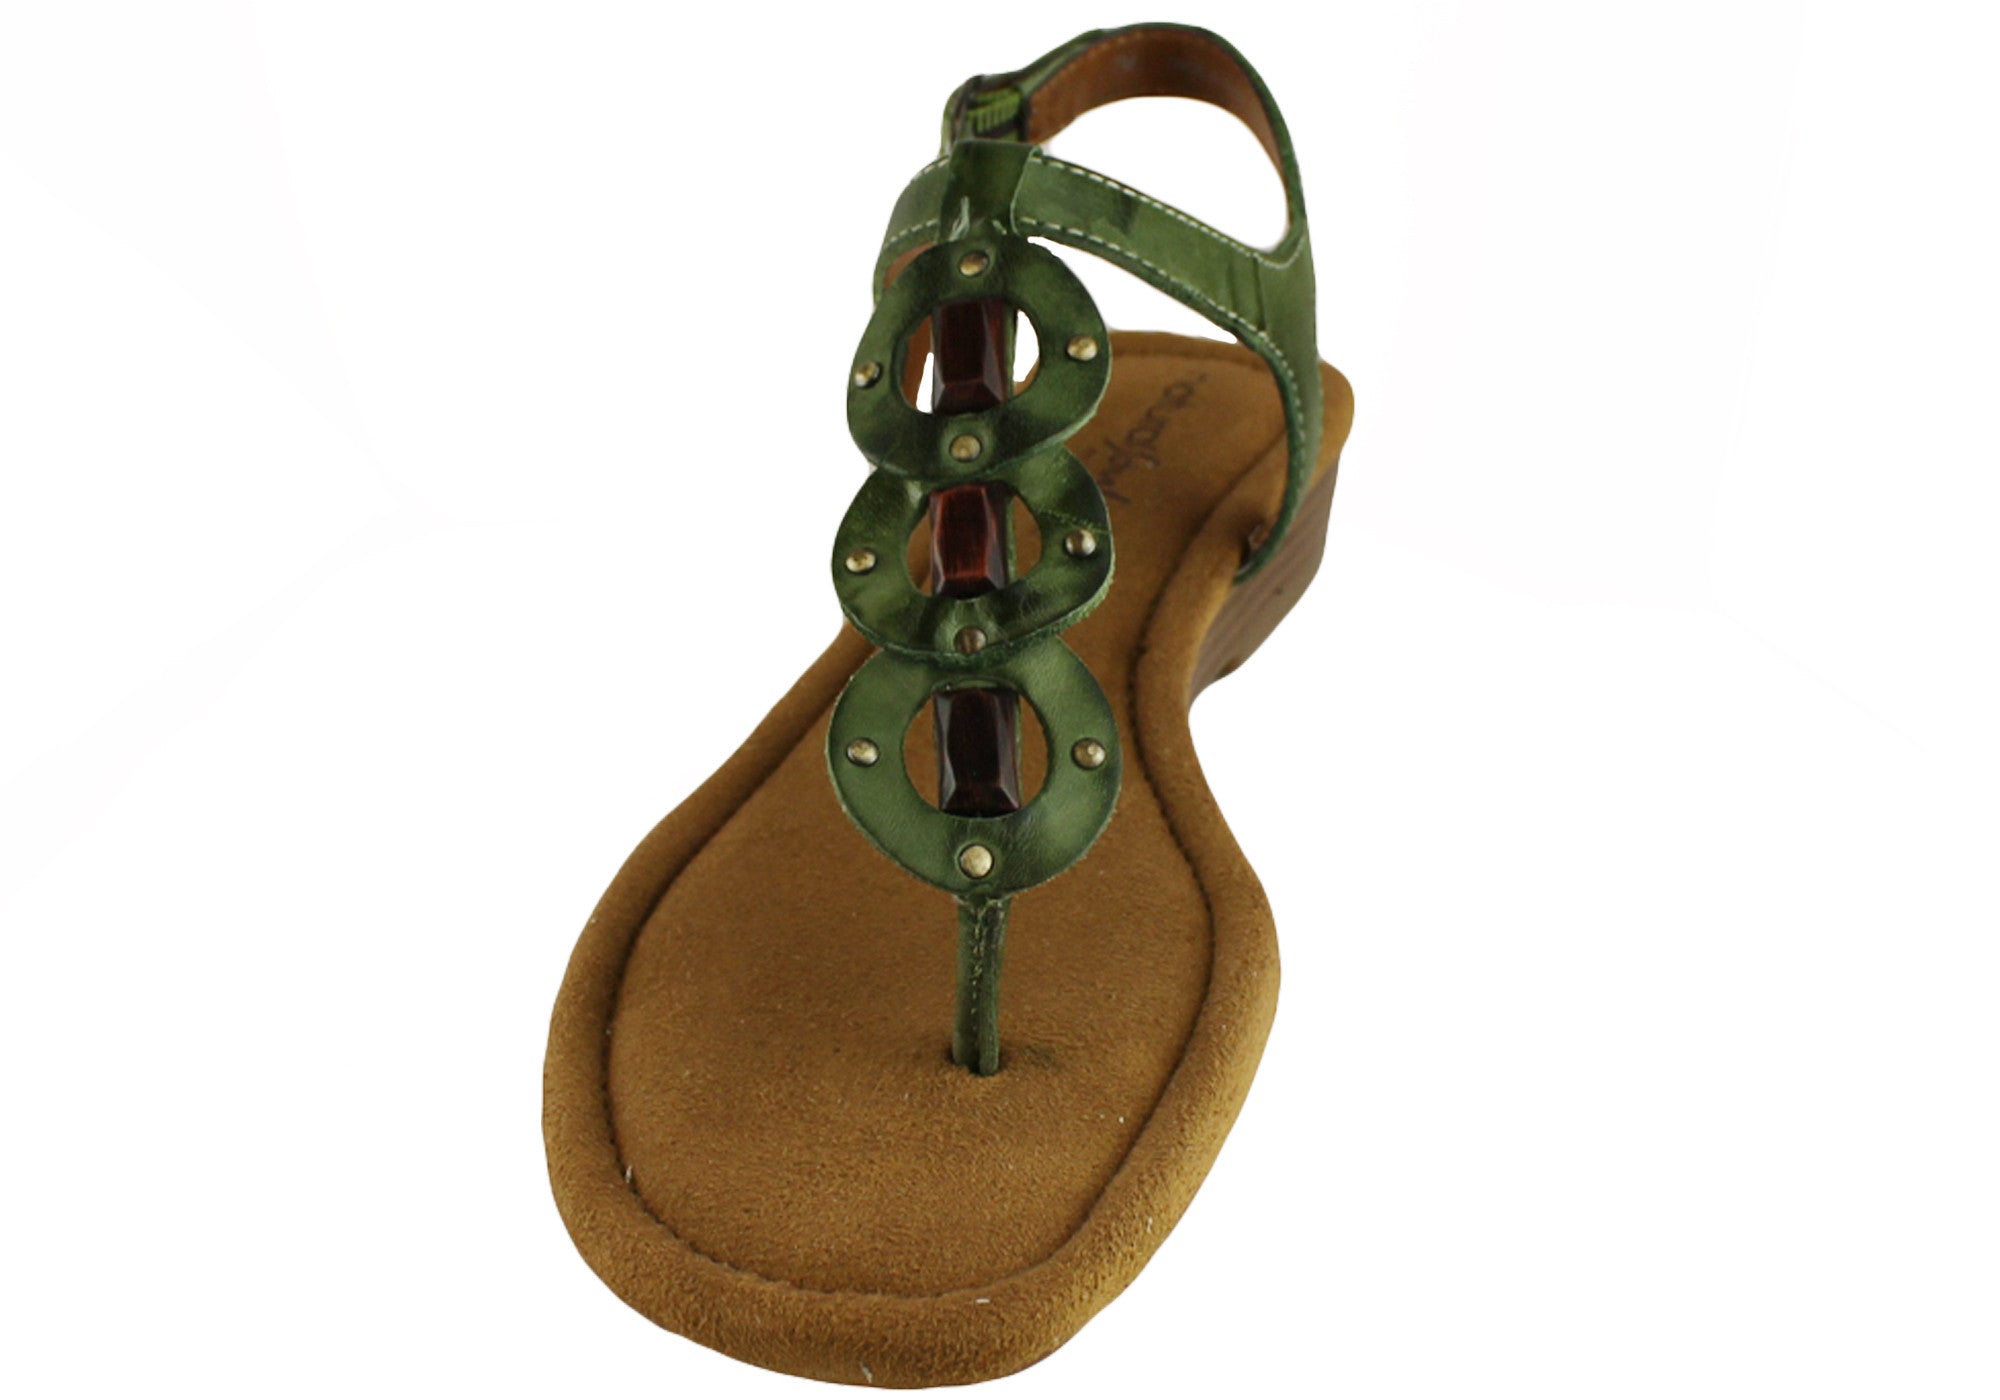 Natural Soul by Naturalizer Rolla Womens Leather Sandals